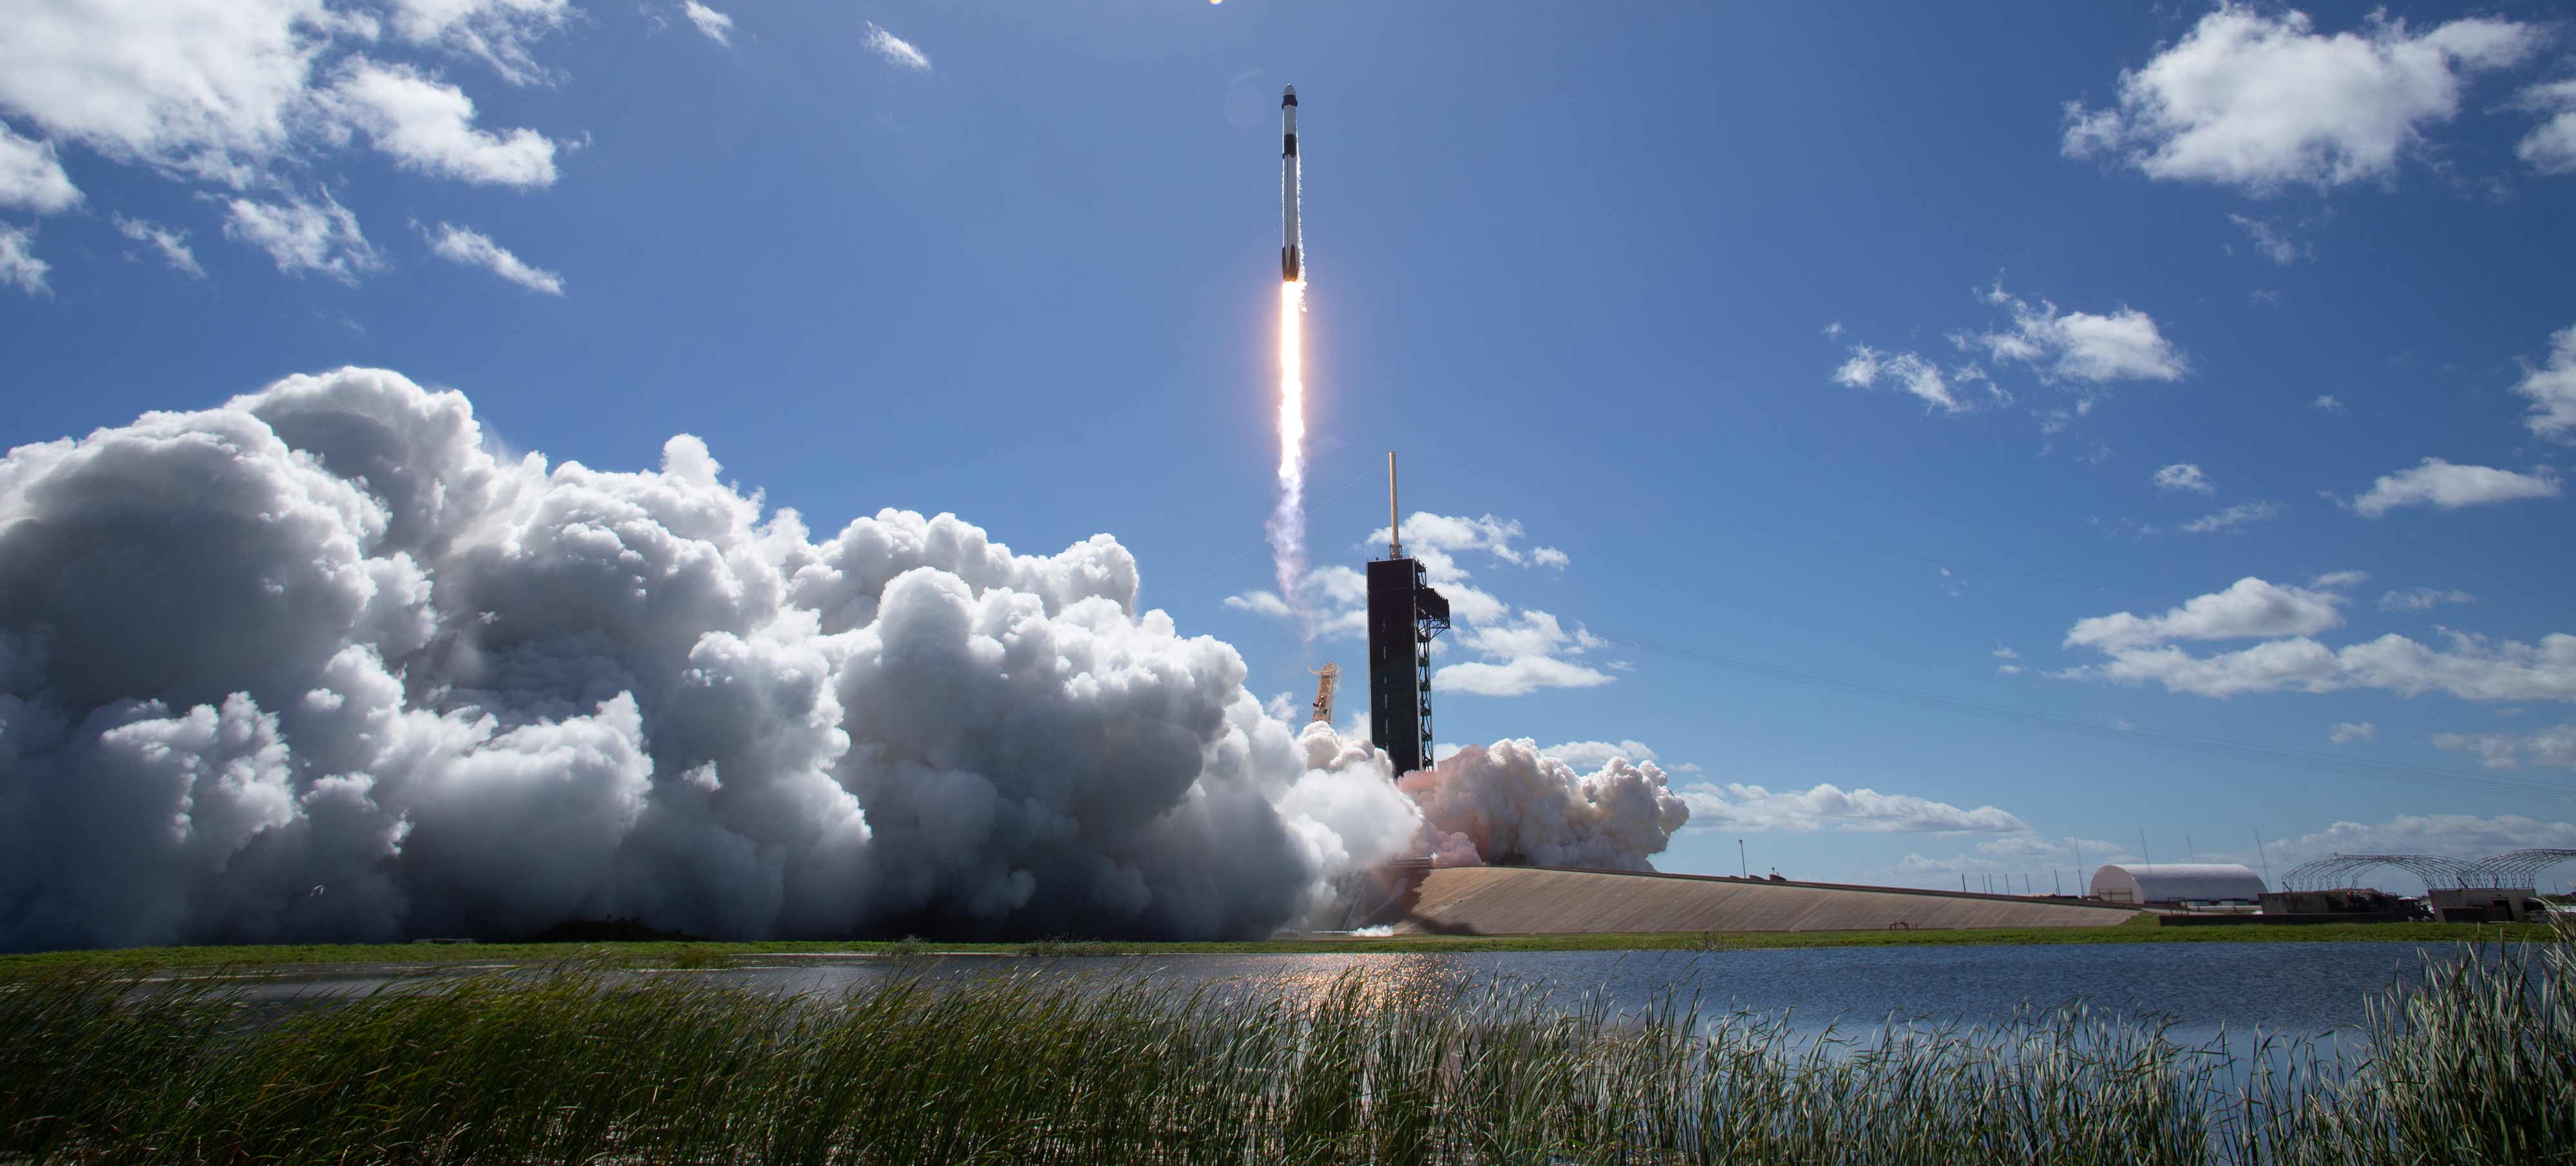 SpaceX&#39;s Crew Dragon spacecraft is launched at the Kennedy Space Center in Florida for the <a href="https://www.cnn.com/2022/10/05/world/gallery/spacex-nasa-crew-5-launch/index.html" target="_blank">historic</a> Crew-5 mission to the International Space Station on October 5. Astronaut Nicole Mann was the first Native American woman to ever travel to space, as well as the first woman to ever take on the role of mission commander for a SpaceX mission. Cosmonaut Anna Kikina was the first Russian to join a SpaceX mission.